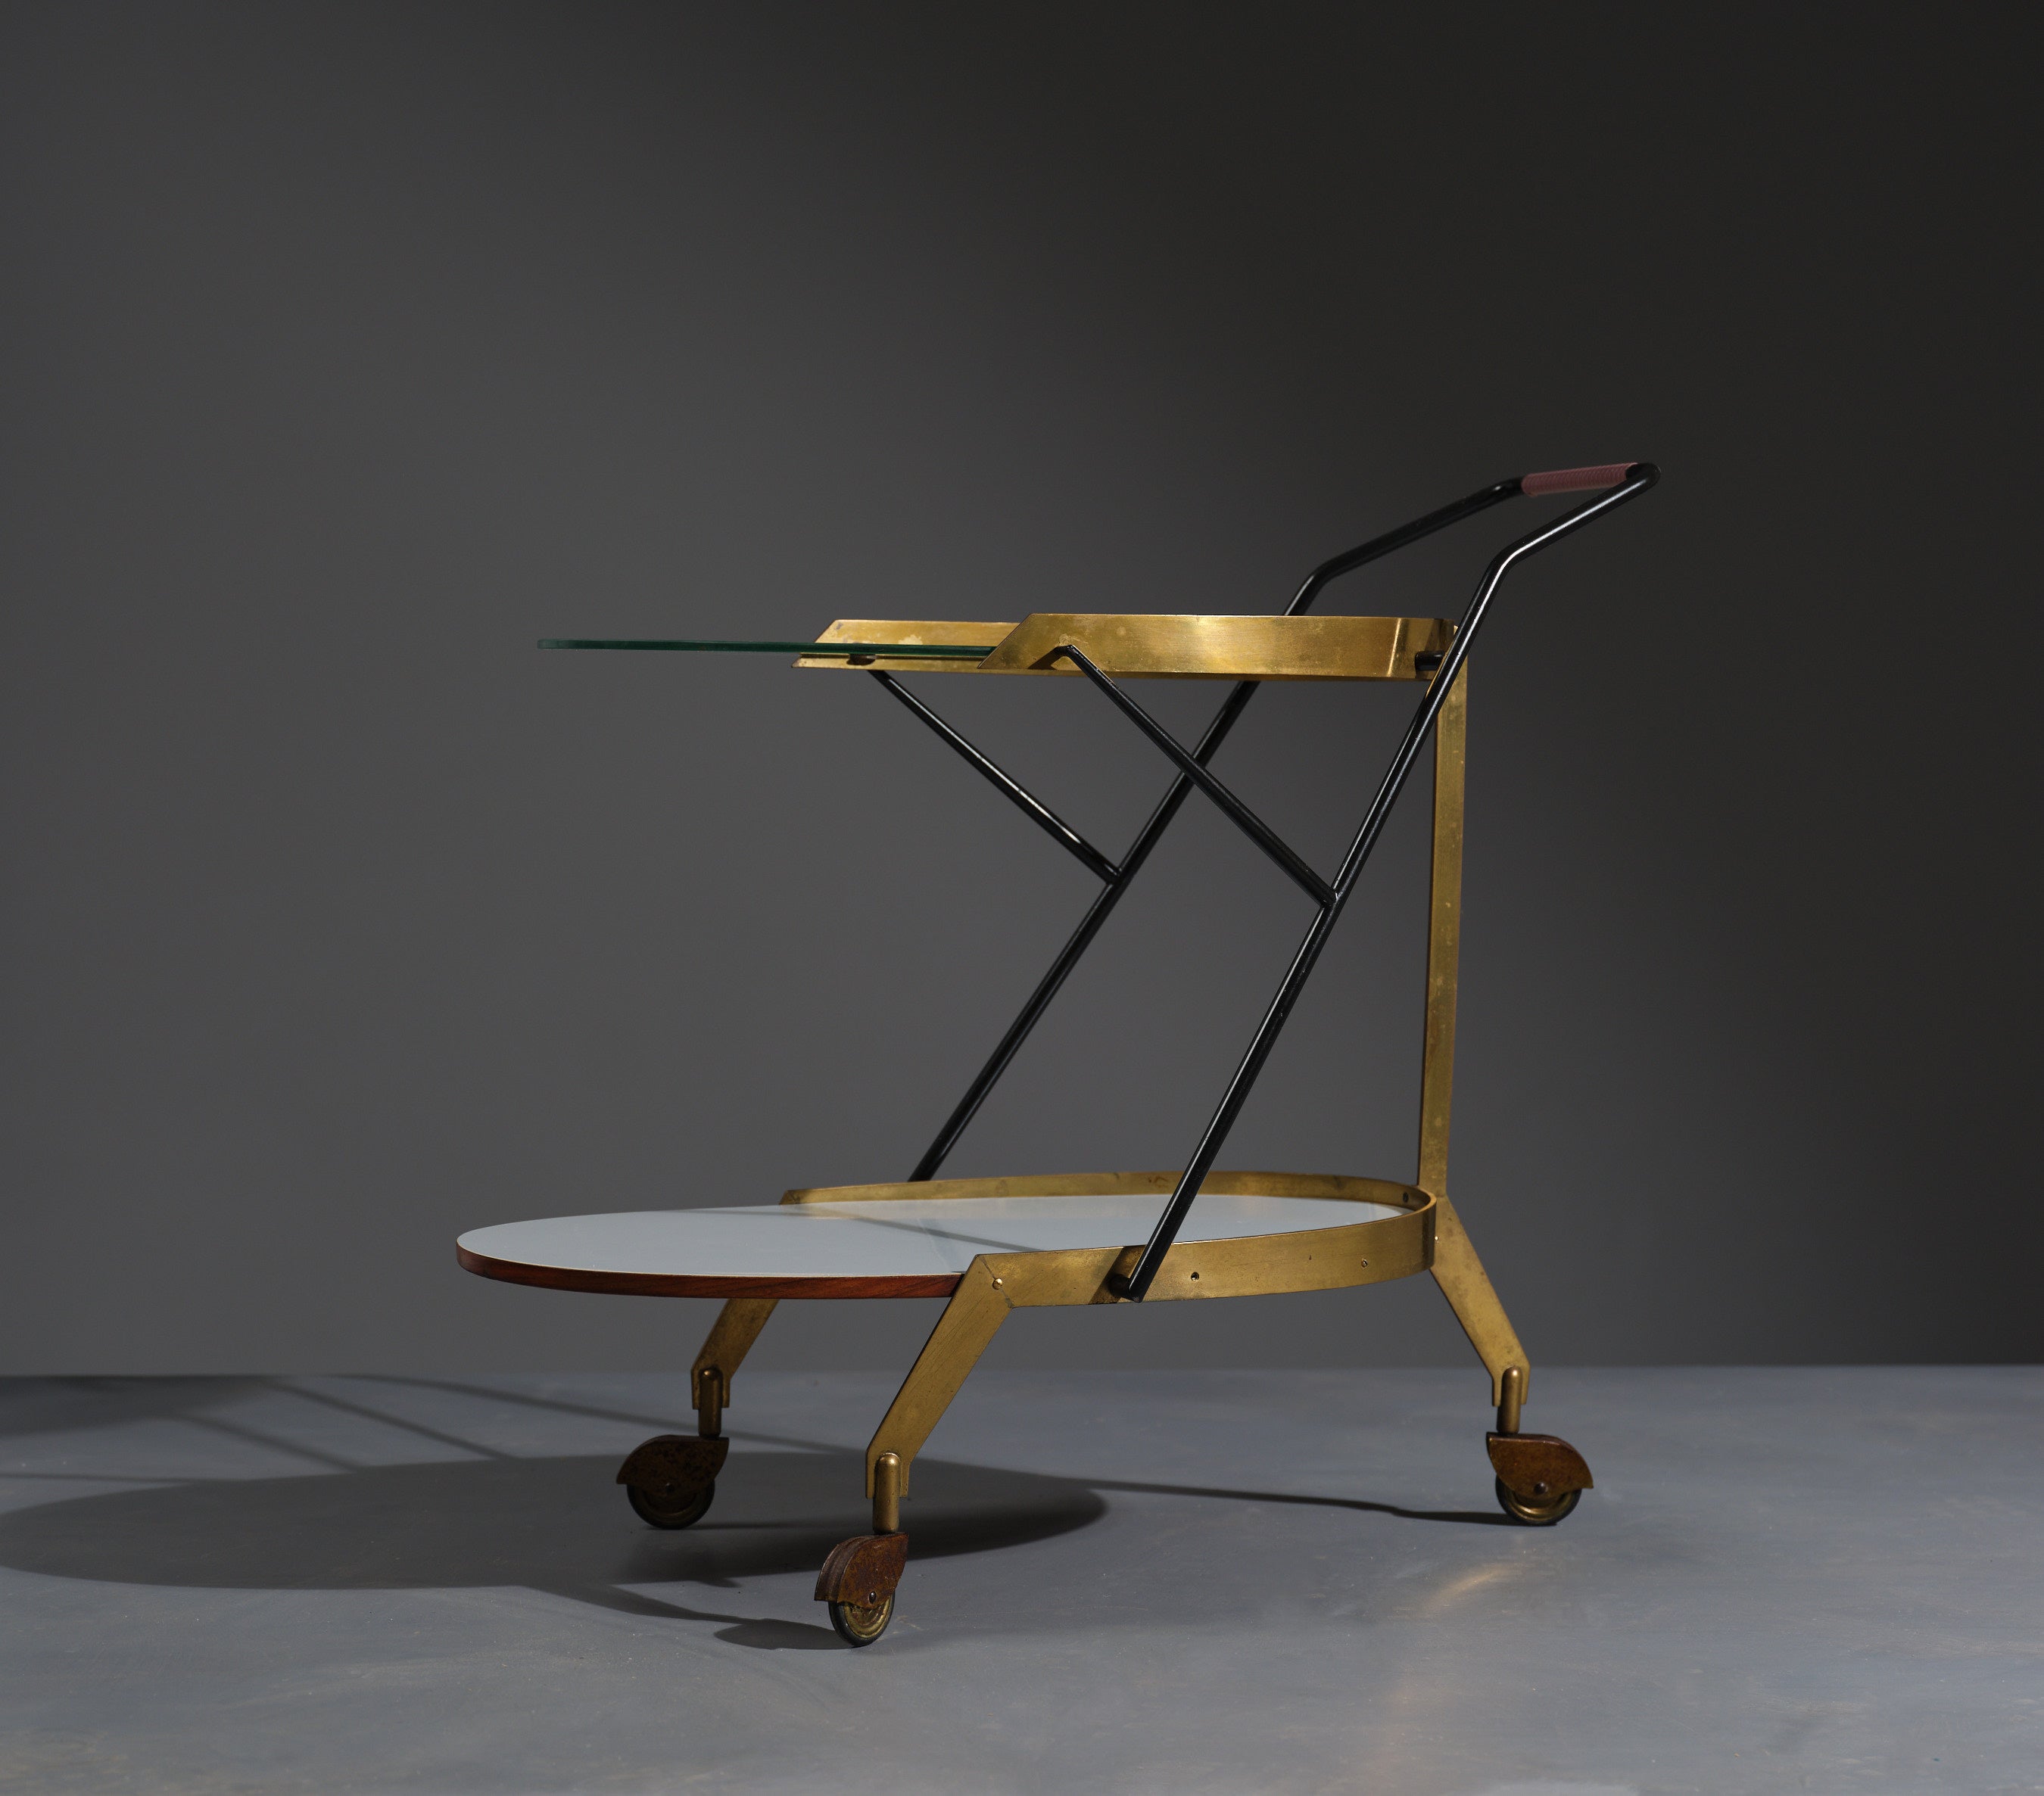 Presenting our exquisite Italian bar cart, a true embodiment of 1950s design. This elegant and functional piece serves as a bar cart, serving trolley, and liquor cart all in one. Its sleek and modern design, combined with Italian craftsmanship,